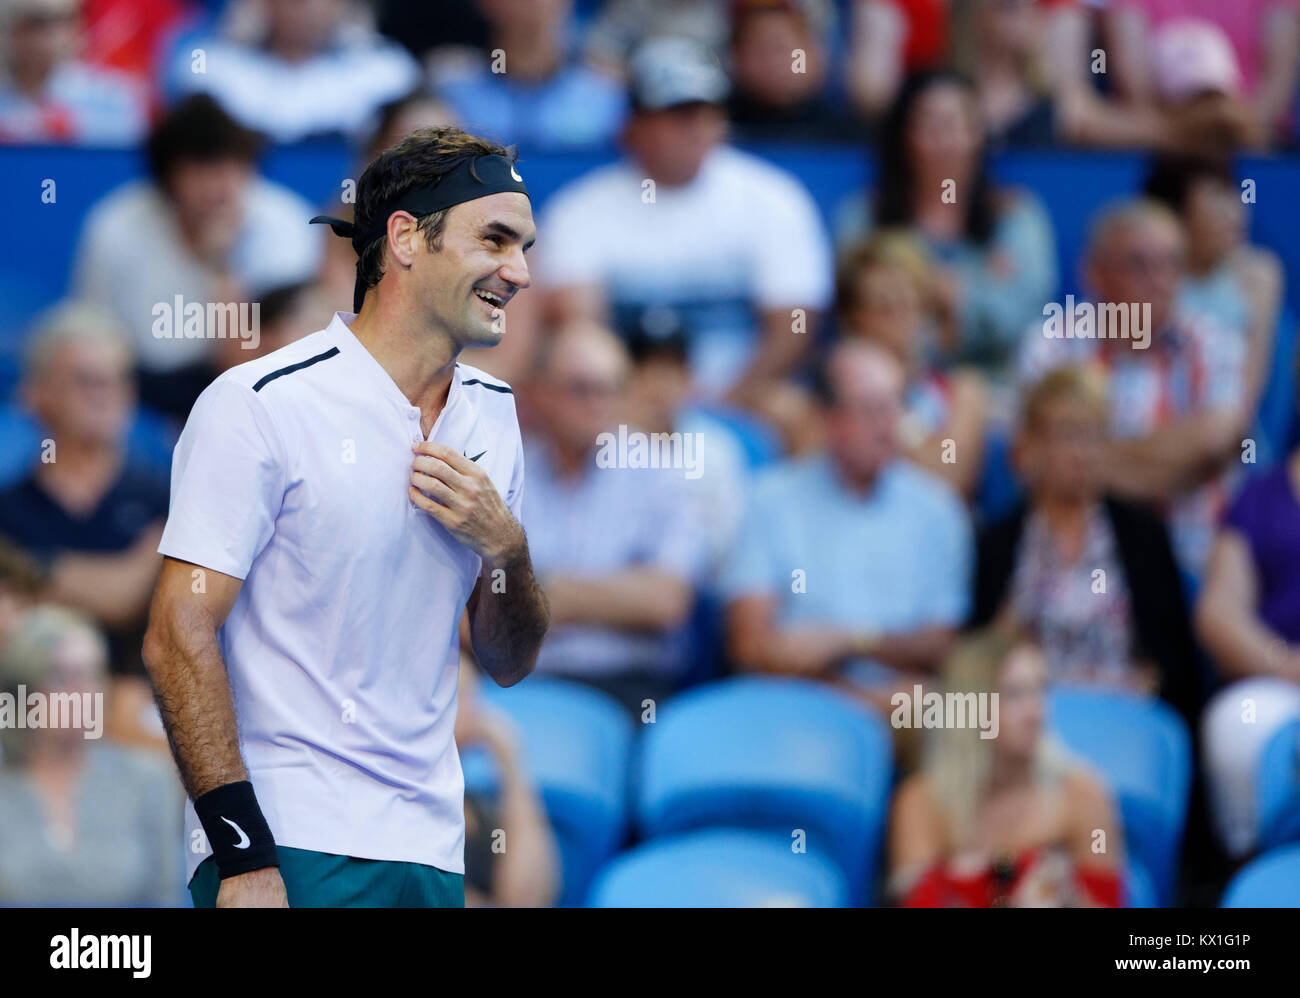 Perth, Australia. 6th january, 2017. Roger Federer of Switzerland reacts during his match against opponent Alexander Zverev of Germany in the final of the Hopman Cup in Perth, Australia, Januray 6, 2018. Credit: Trevor Collens/Alamy Live News Stock Photo